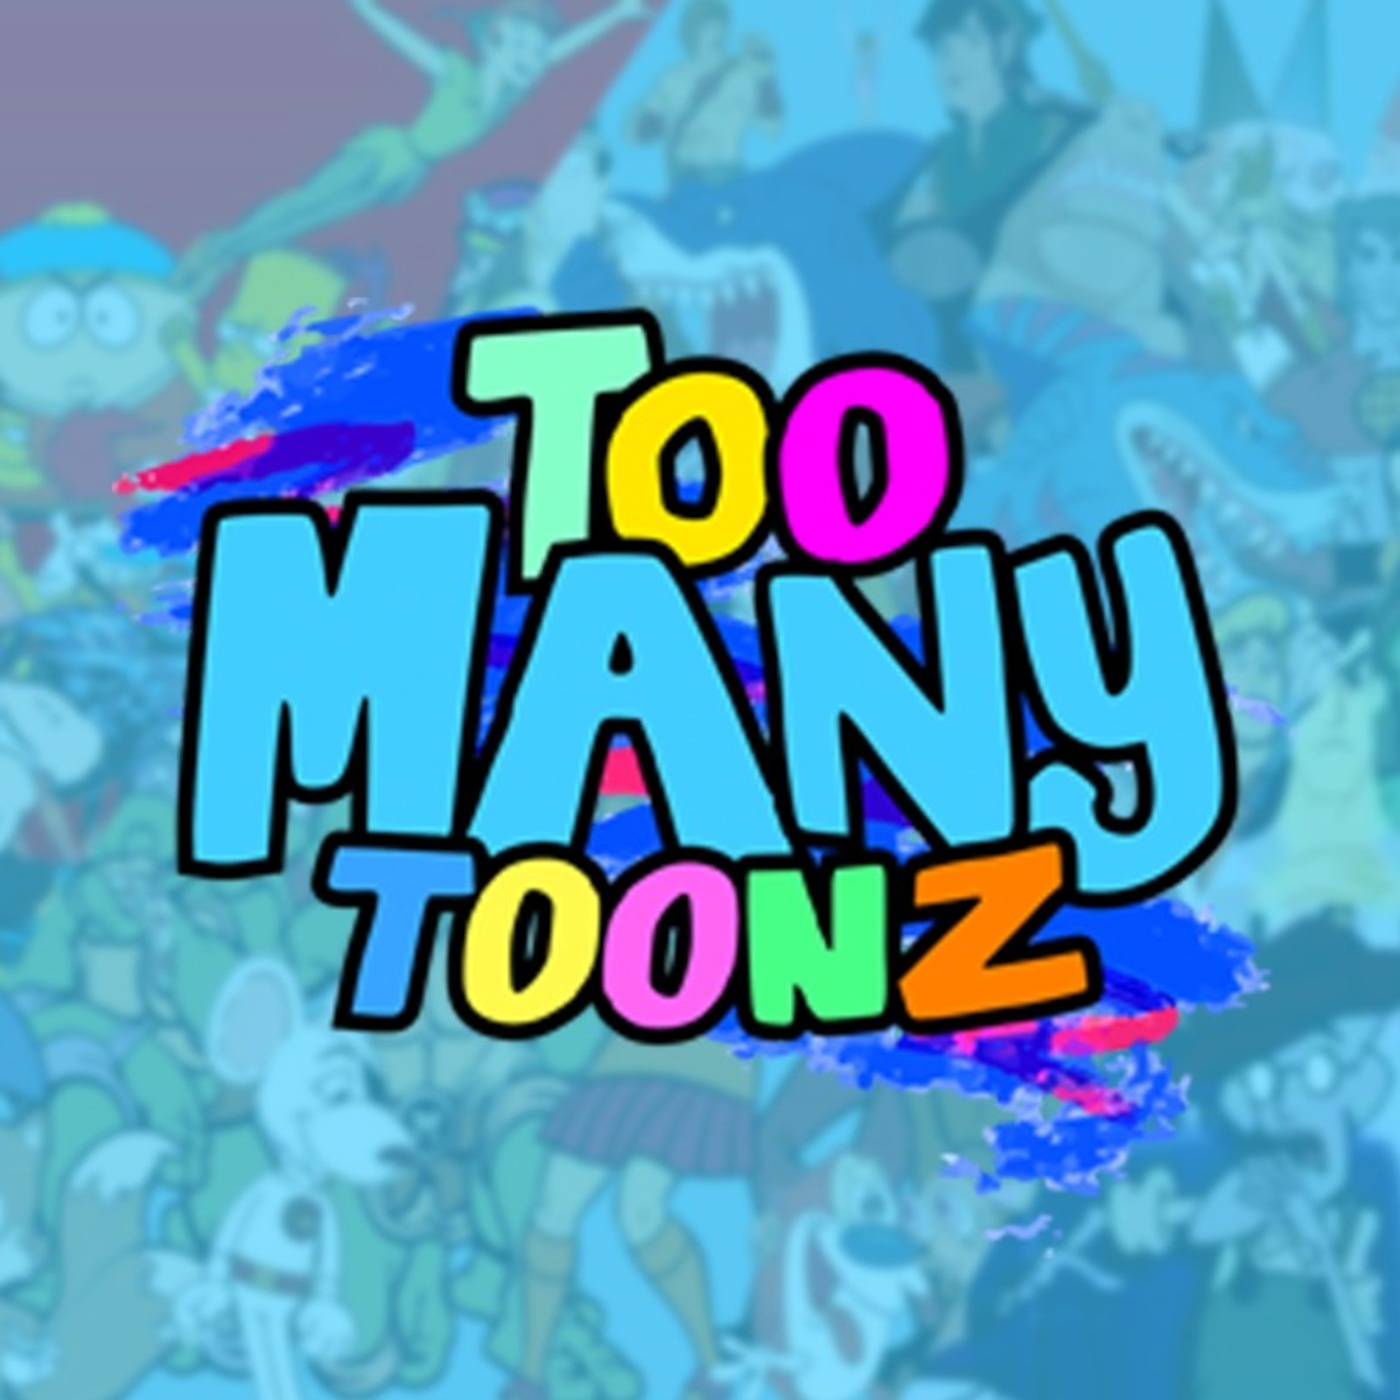 Grim Adventures of Billy and Mandy - S1 Ep.5 & S6 Ep.7 - Ep. 10 Too Many Toonz!